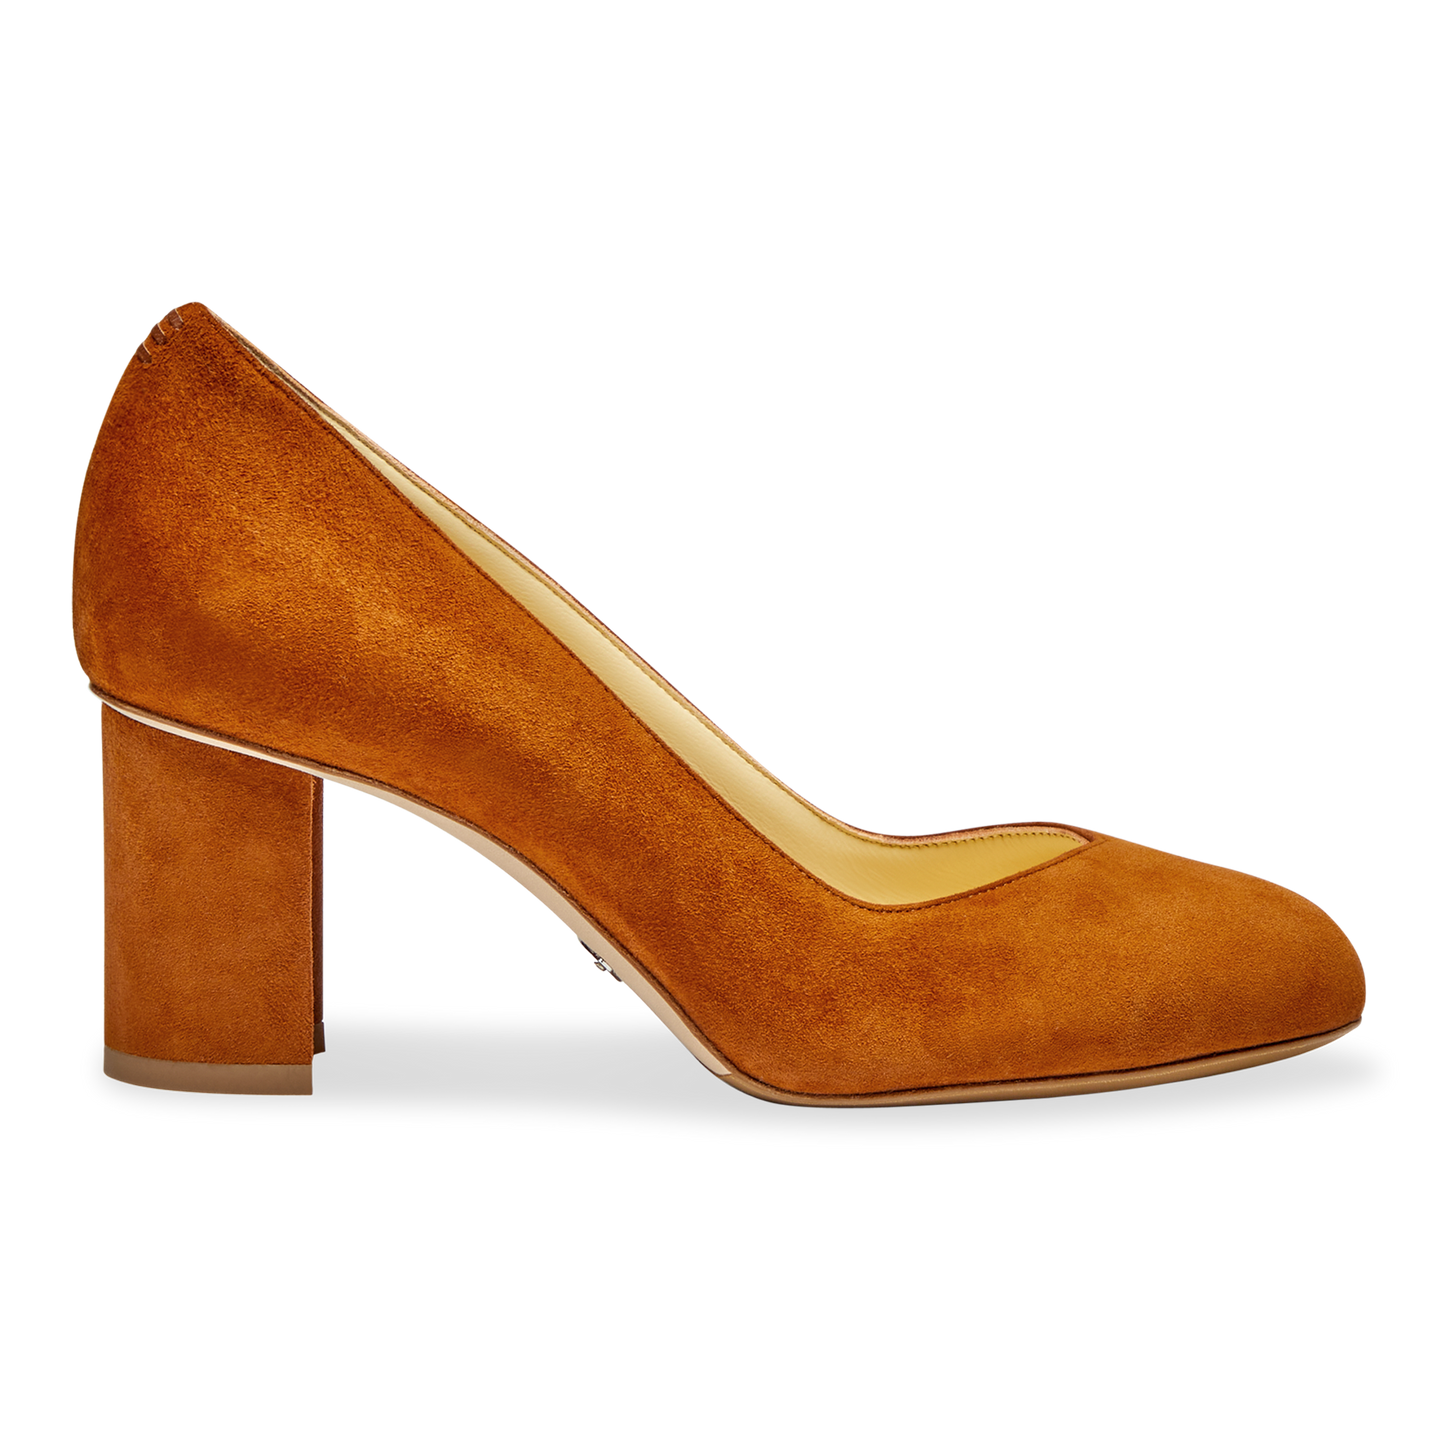 Perfect Round Toe Pump in Cognac Suede Handcrafted in Italy